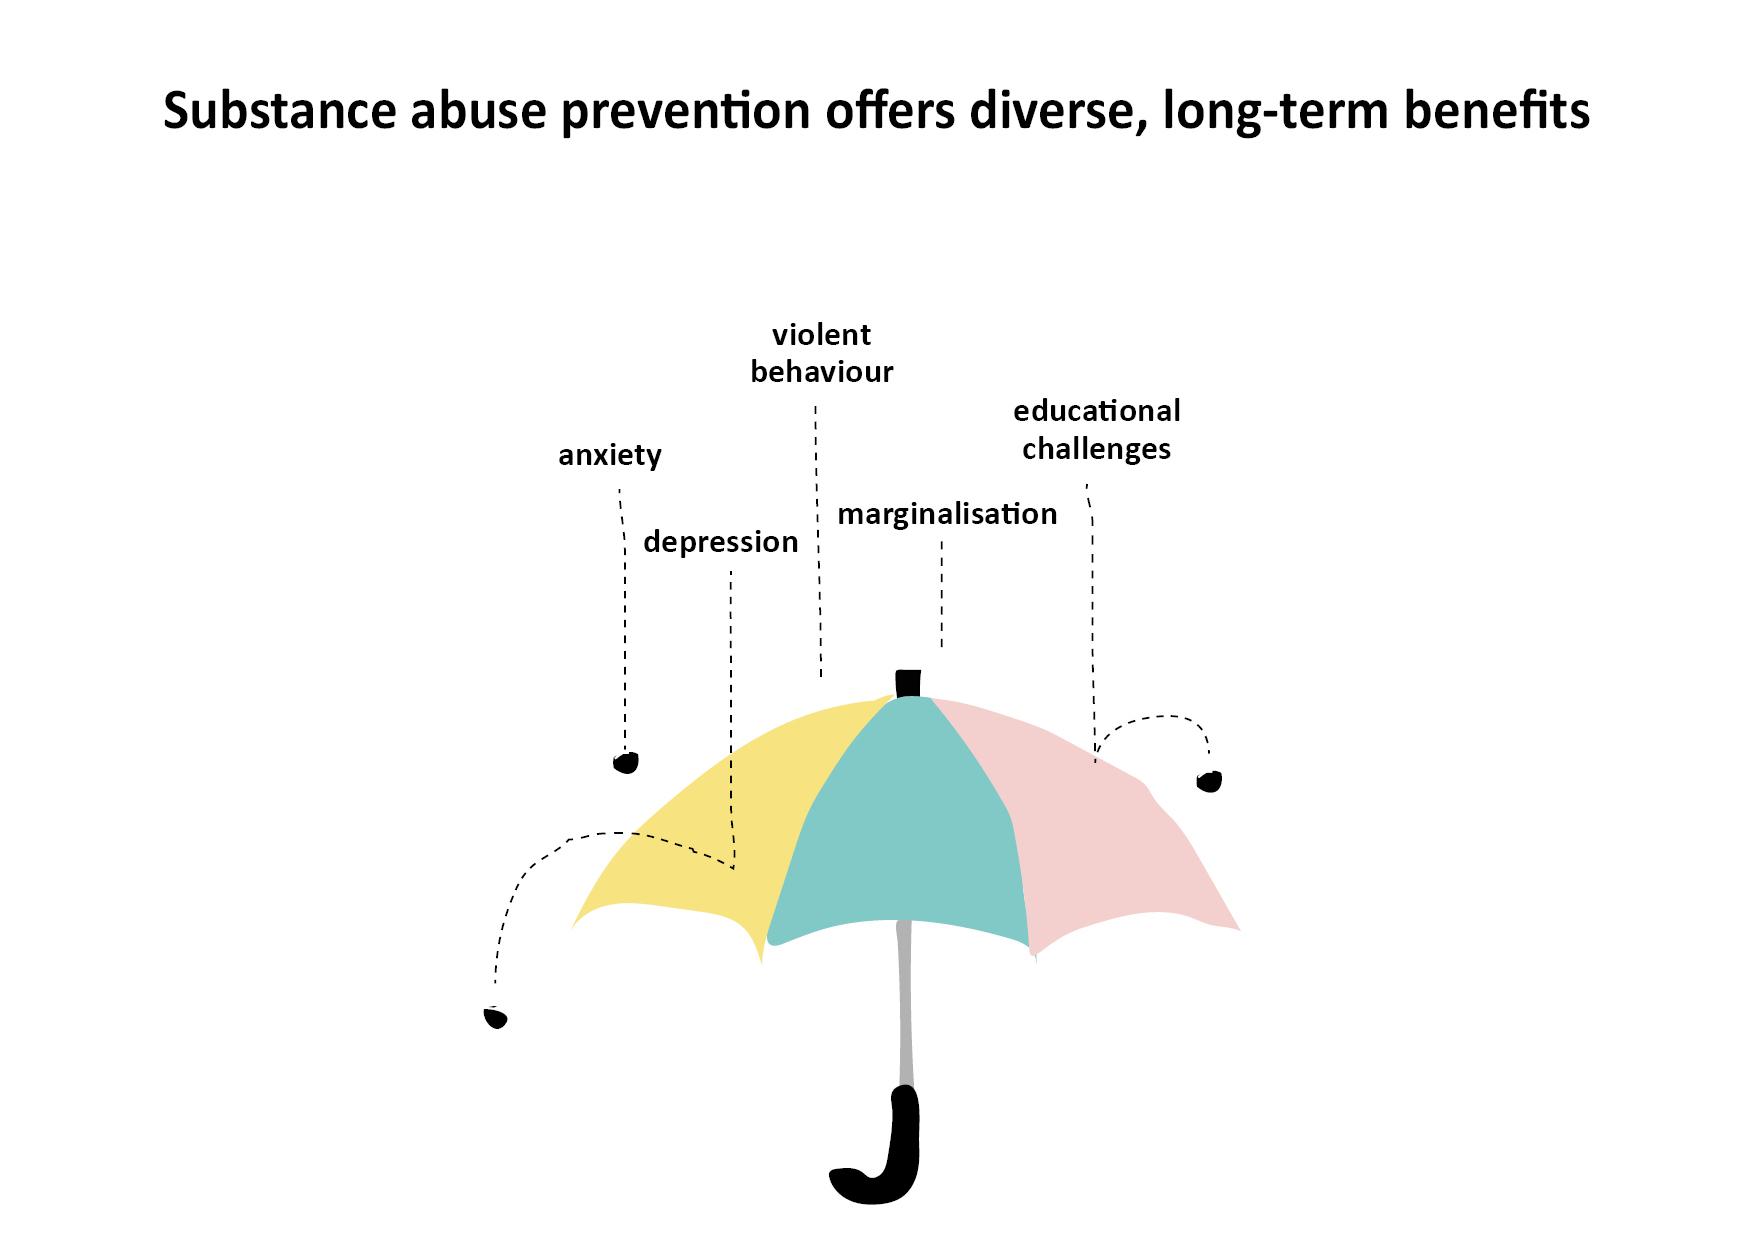 Infographer: Substance abuse prevention offers diverse and long-term benefits. Substance abuse prevention reduces e.g. anxiety, depression, violent behavior, marginalisation and educational challenges.